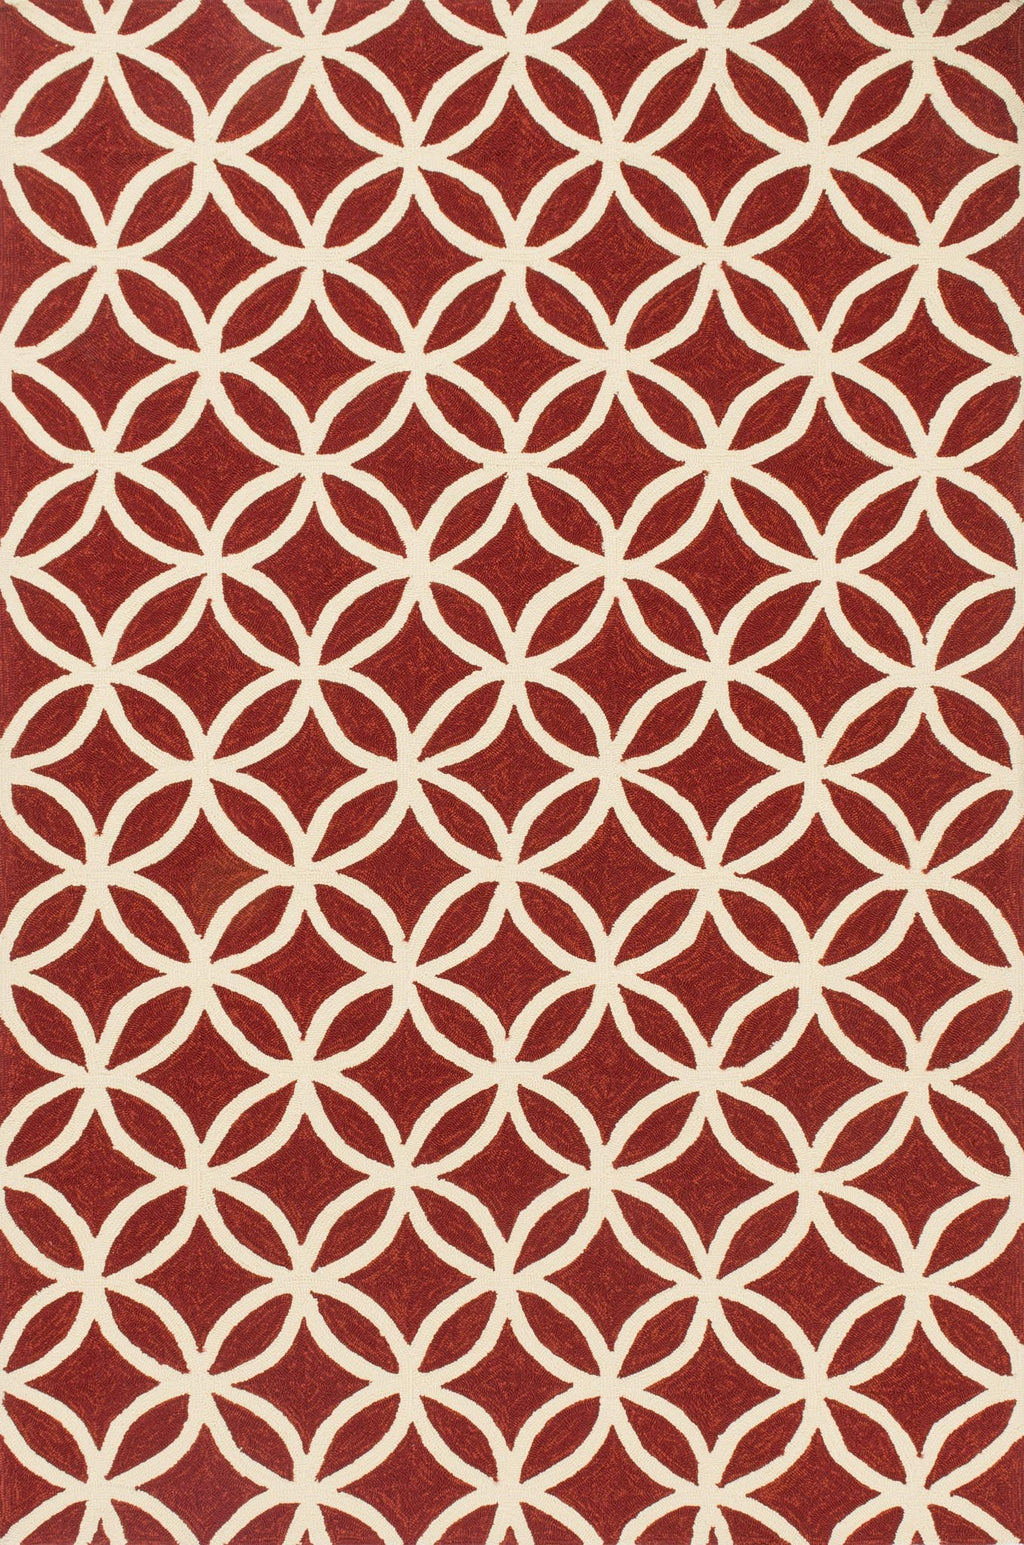 VENICE BEACH Collection Rug  in  RED / IVORY Red Small Hand-Hooked Polypropylene